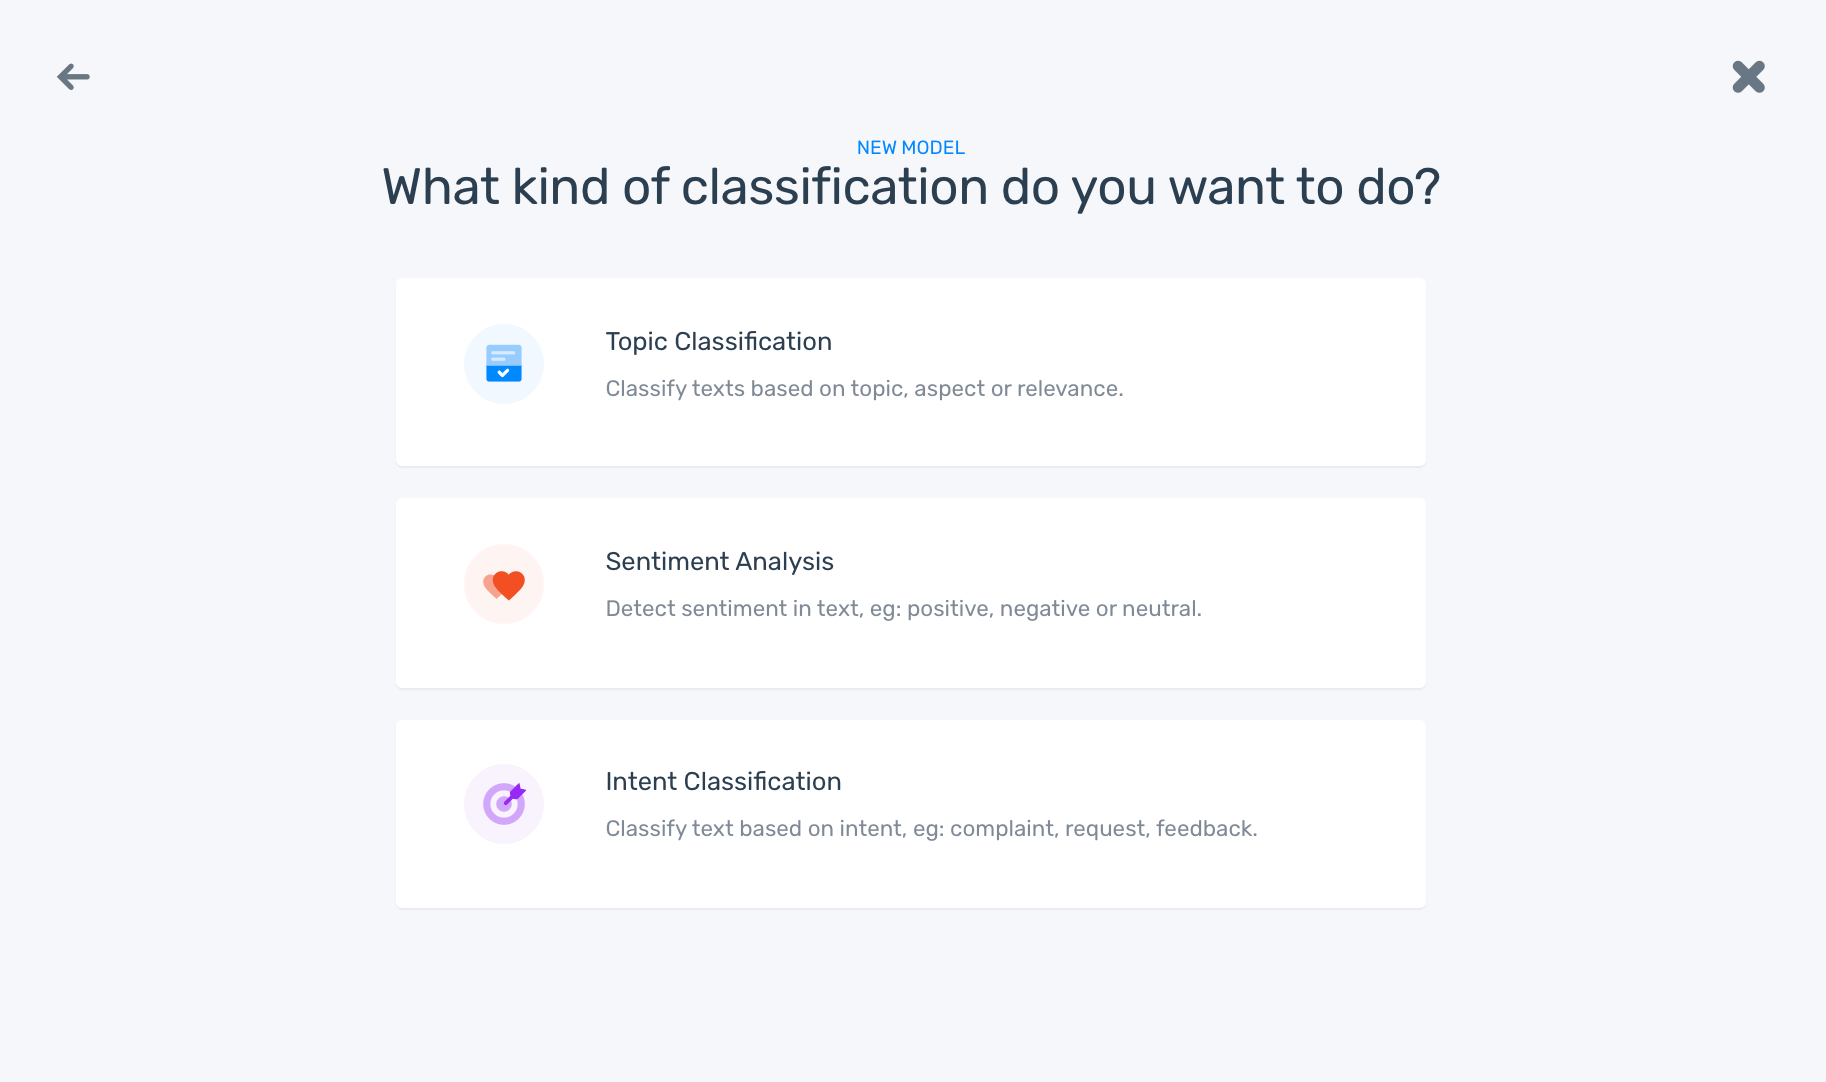 The option to choose Text Classification, Sentiment Analysis, or Intent Classification.